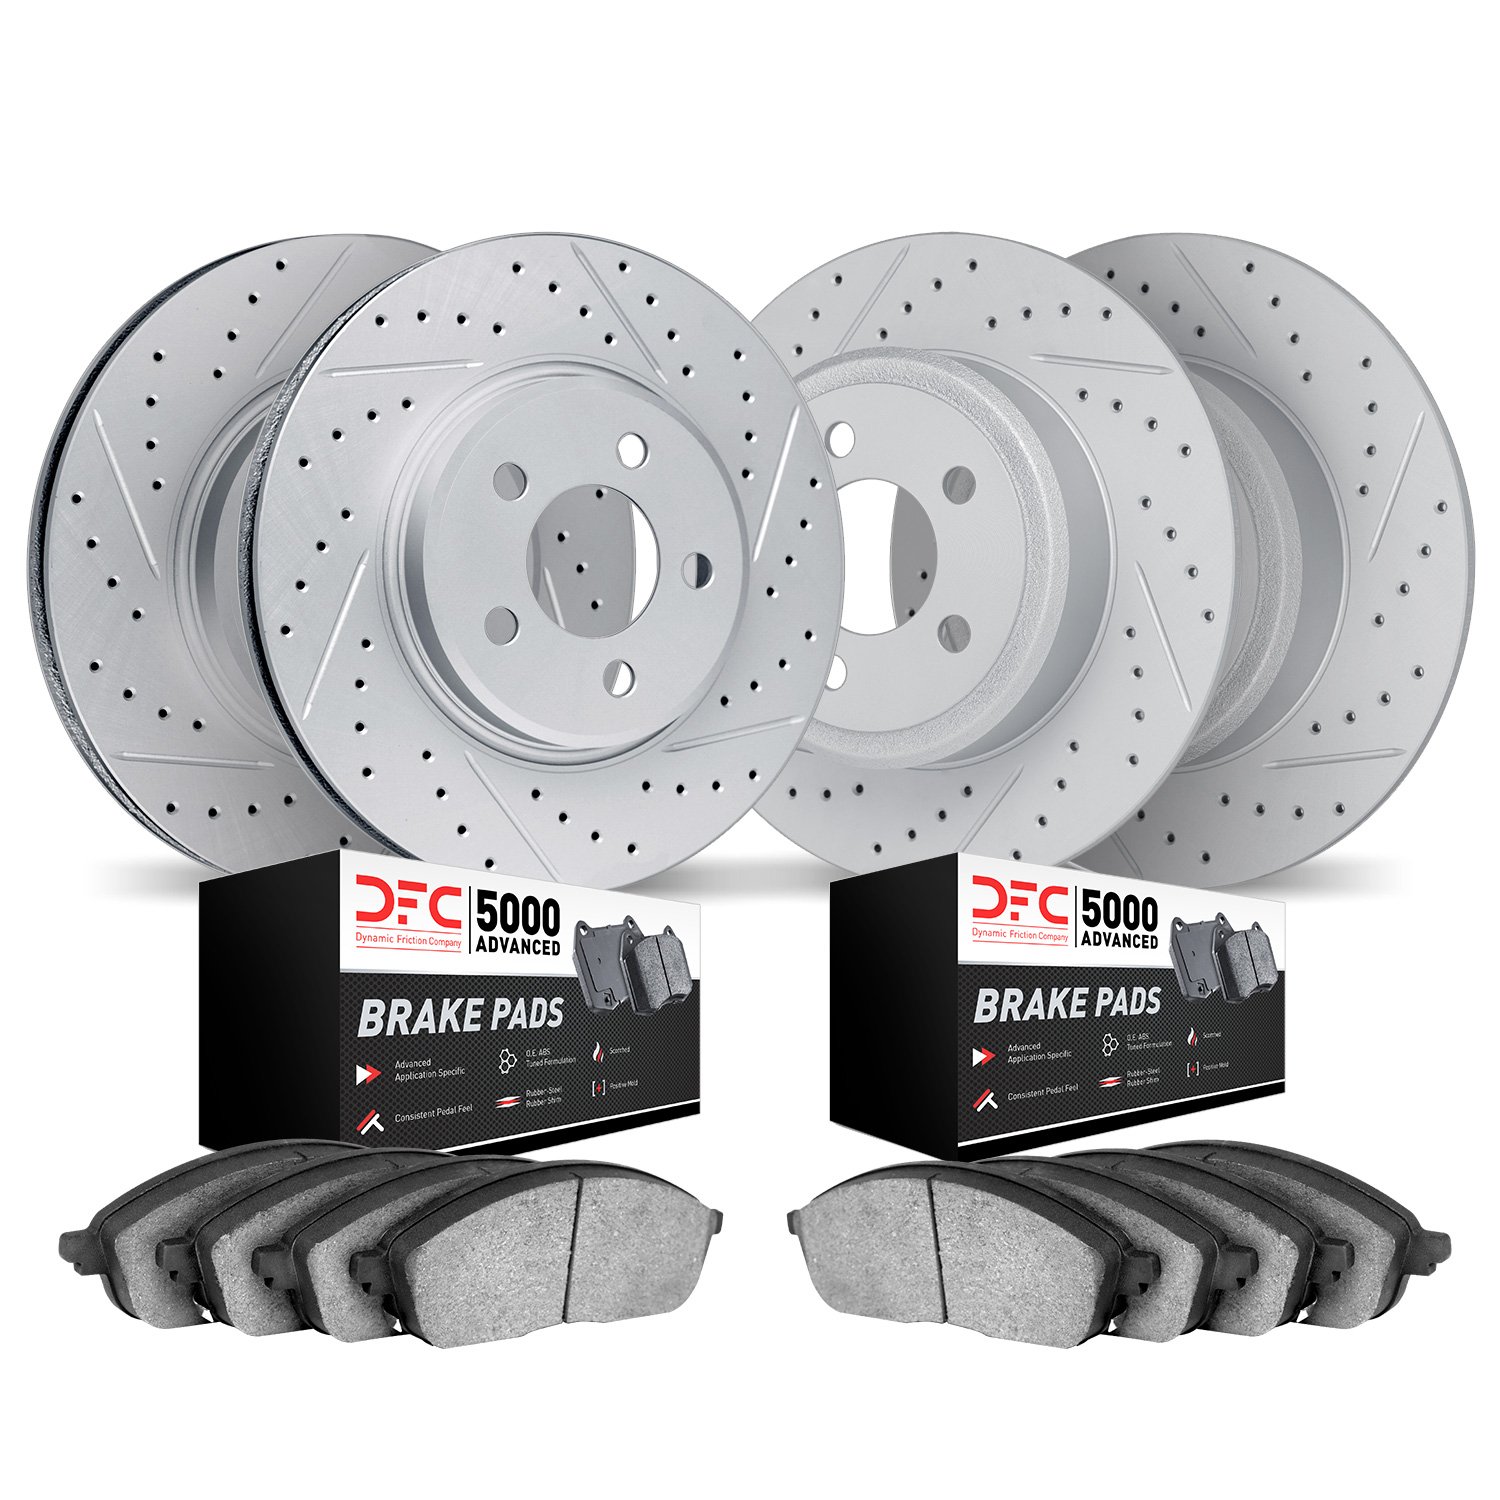 2504-58005 Geoperformance Drilled/Slotted Rotors w/5000 Advanced Brake Pads Kit, 2017-2020 Acura/Honda, Position: Front and Rear